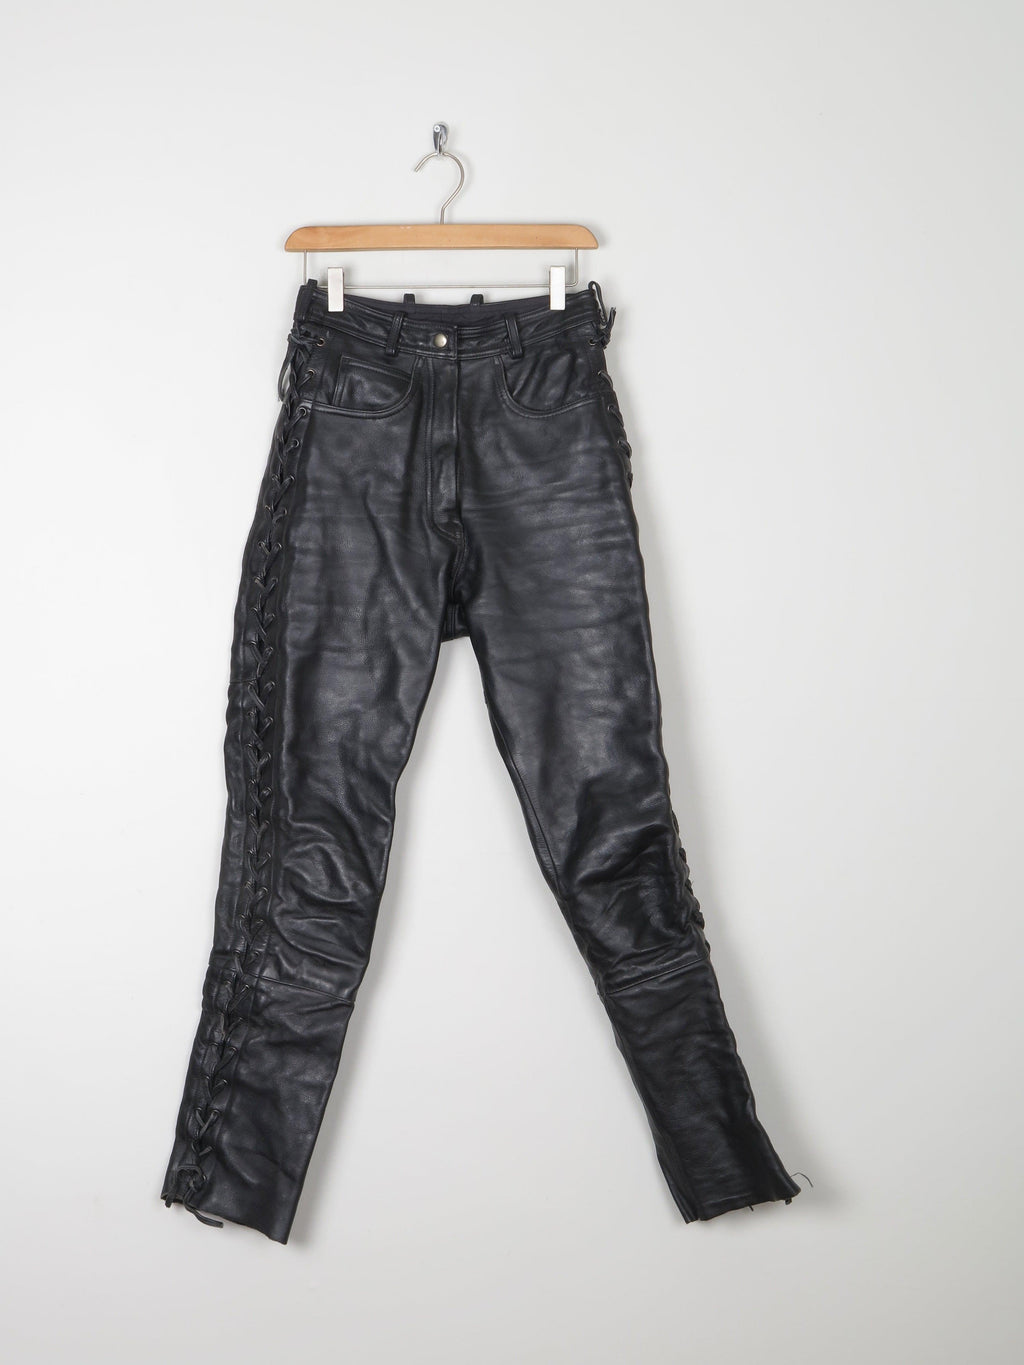 Women’s Biker Heavy Leather Trousers 27" XS - The Harlequin